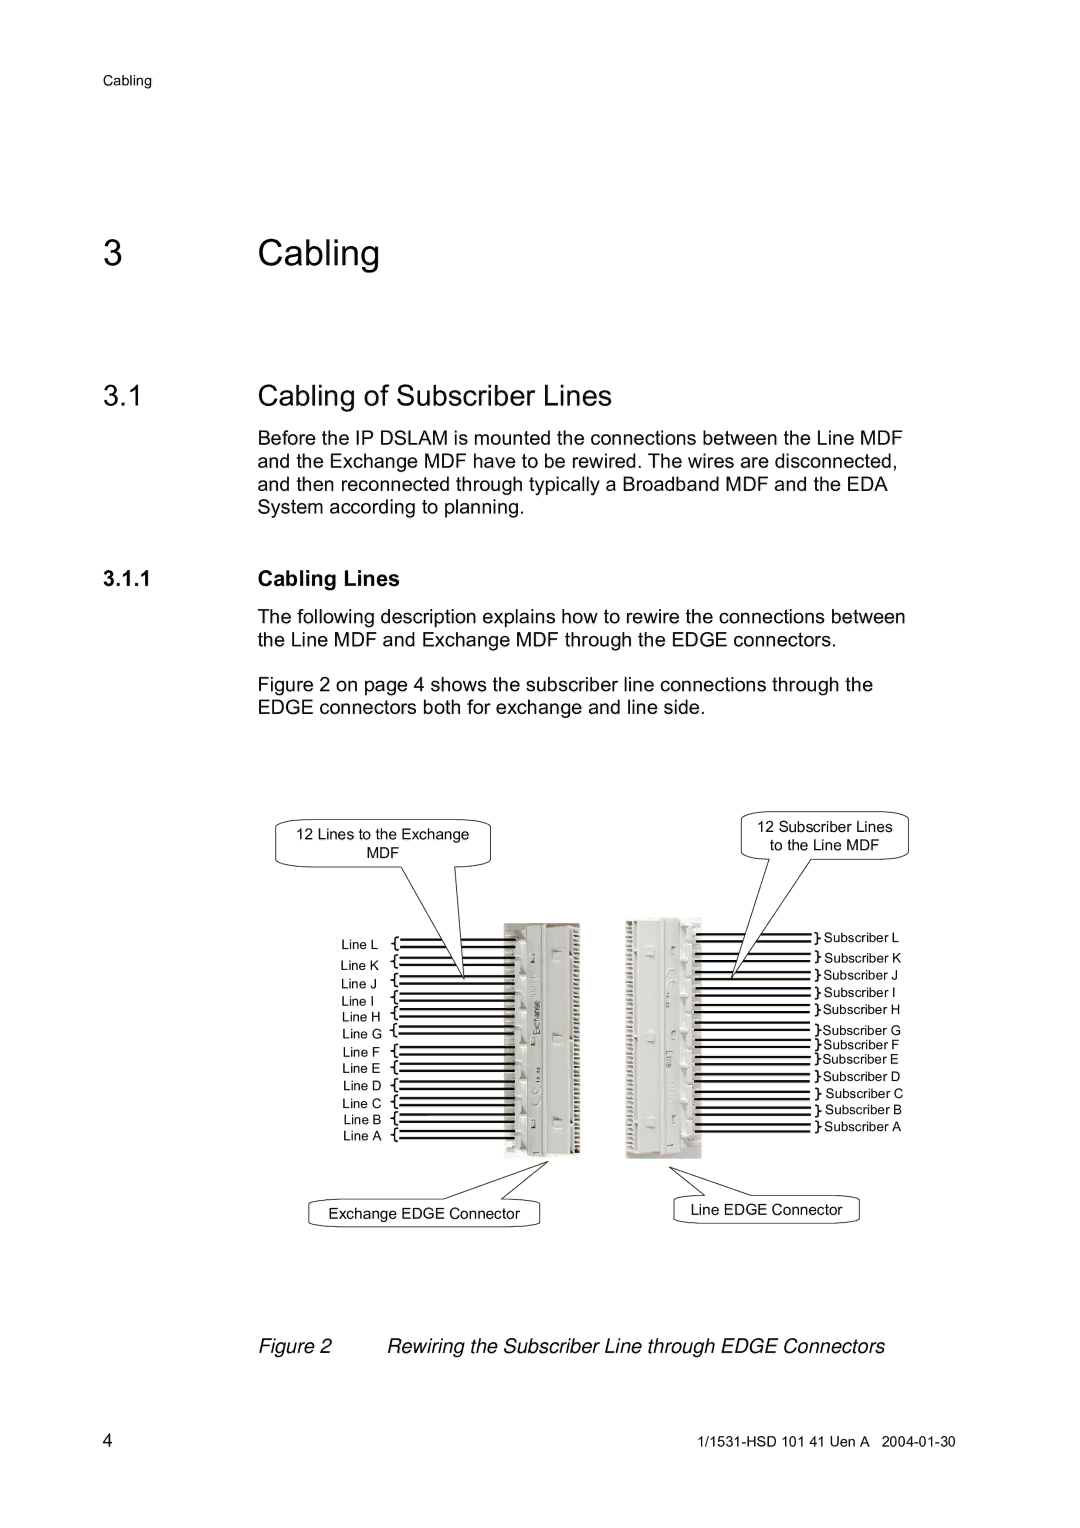 Ericsson IP DSLAM, EDN312 manual Cabling of Subscriber Lines 